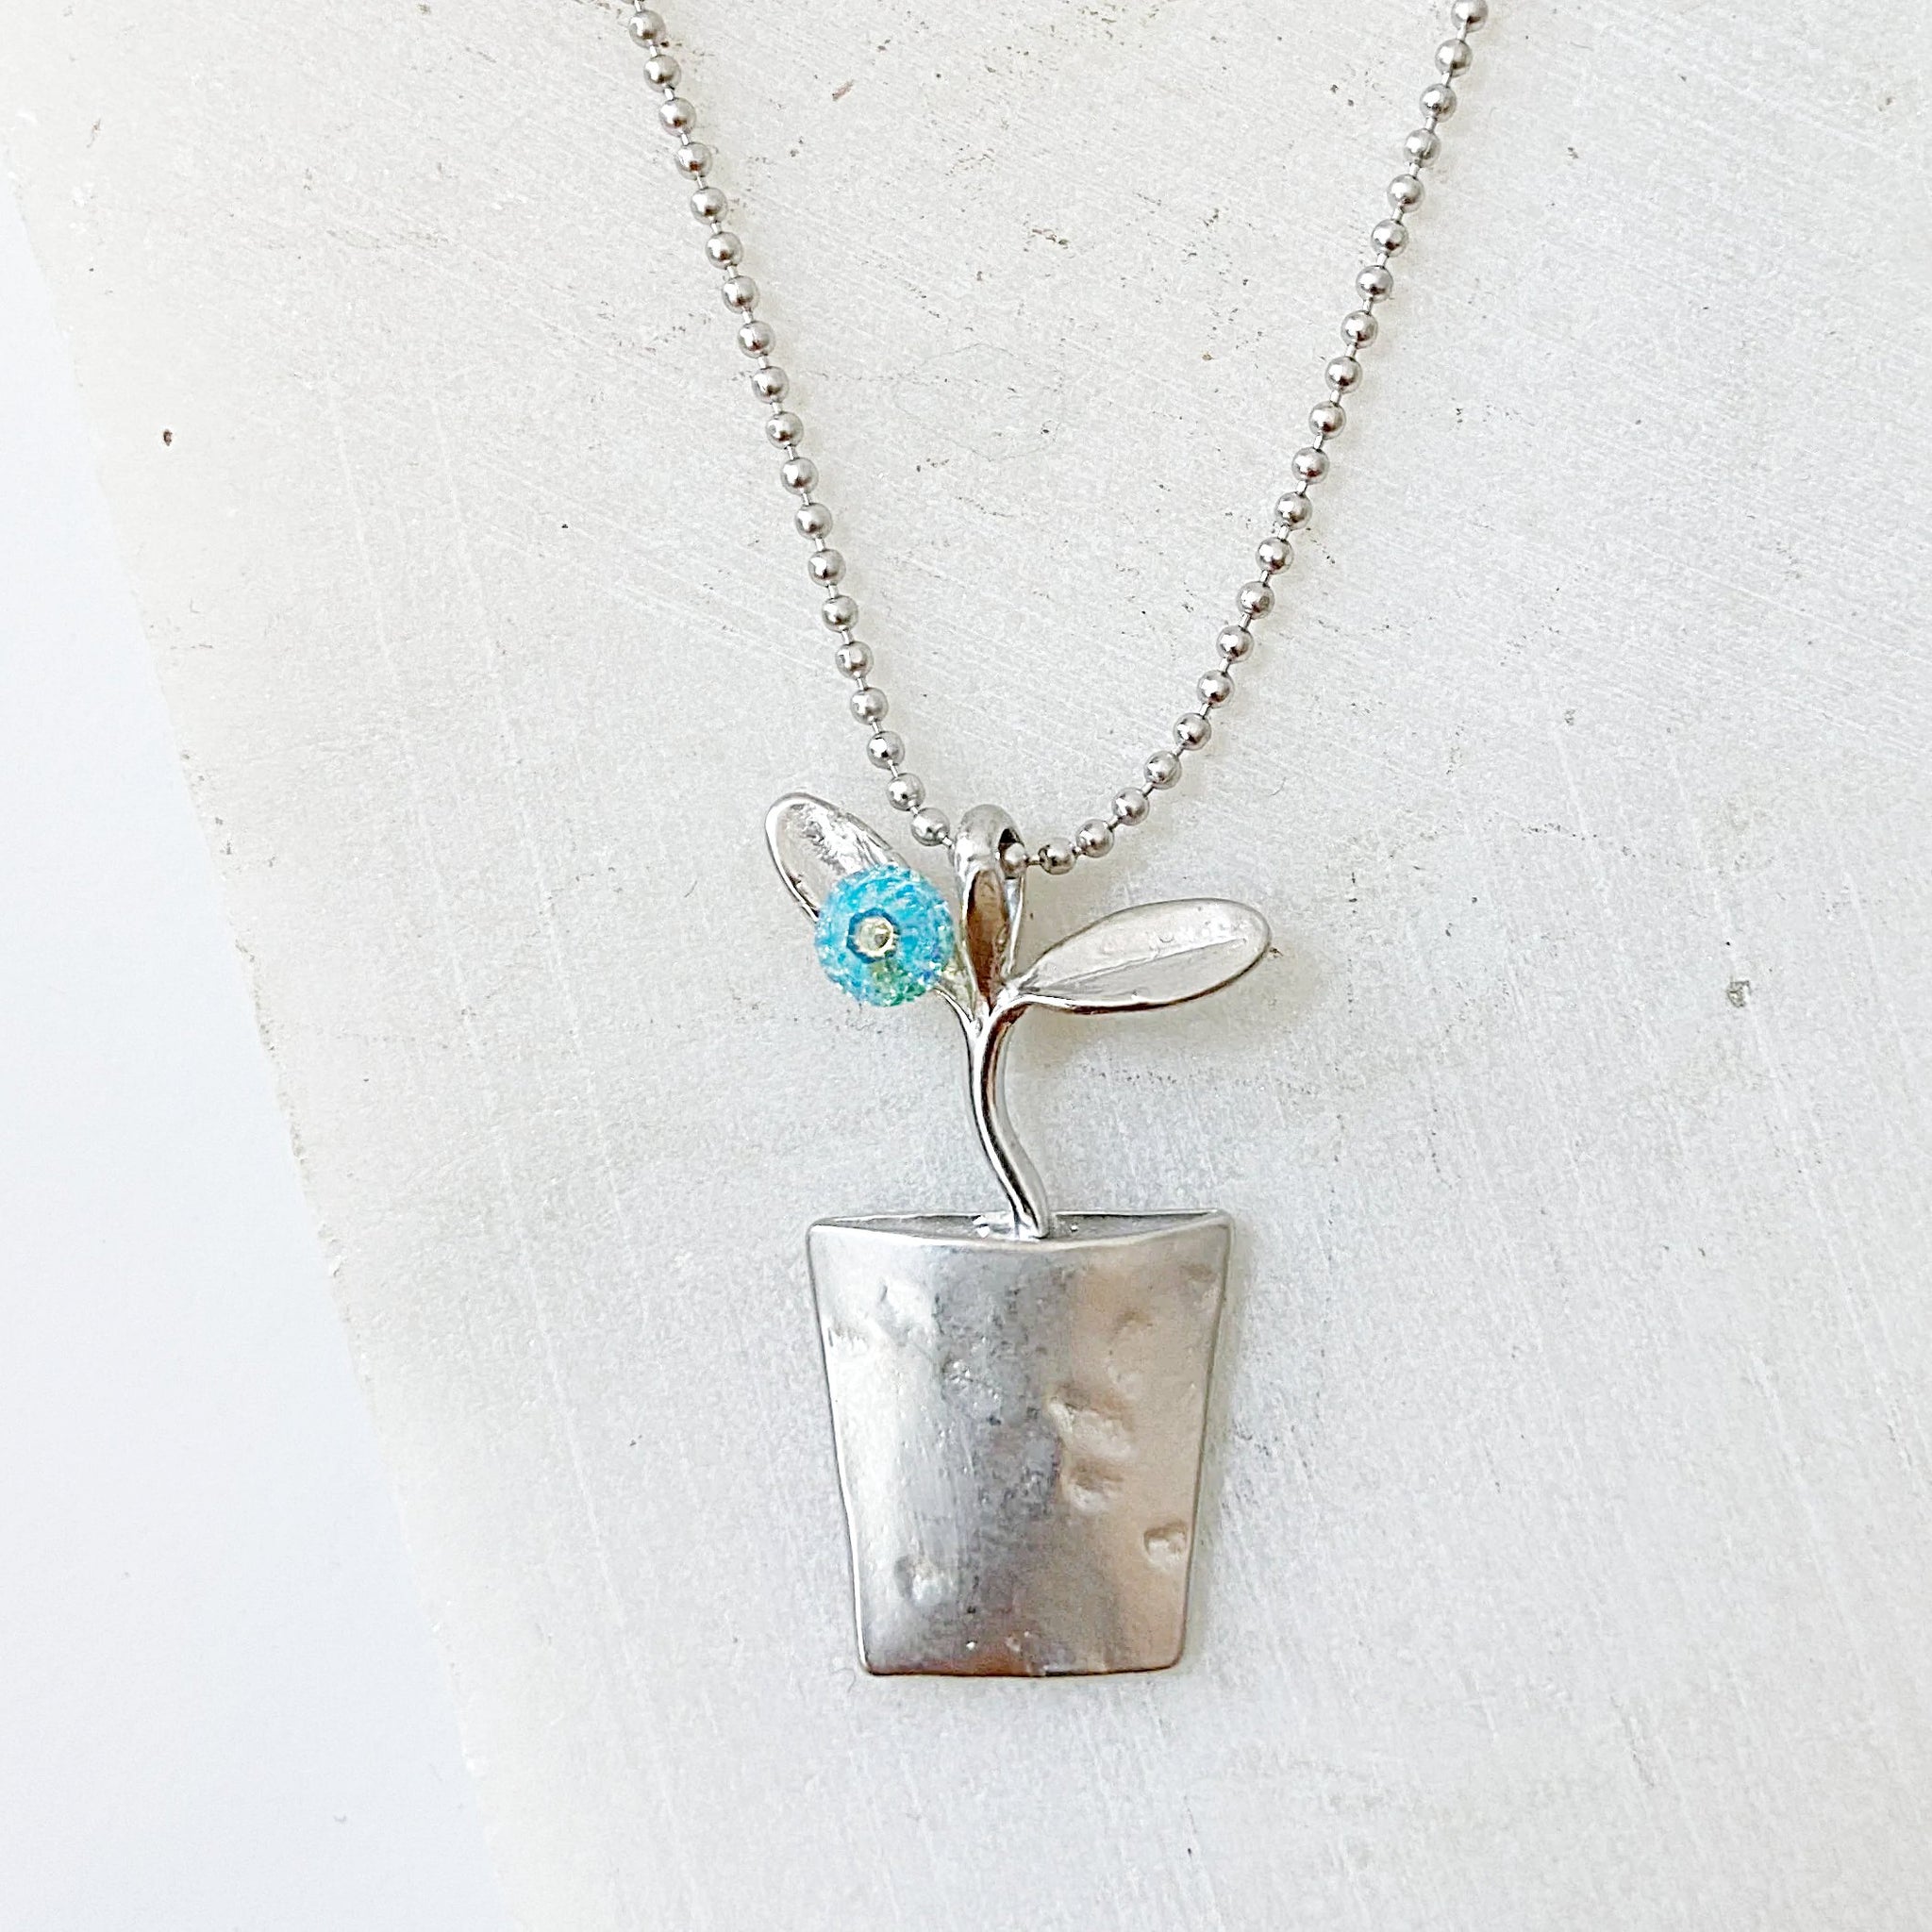 Sprouting Leaves in a Pot Necklace Kathy James